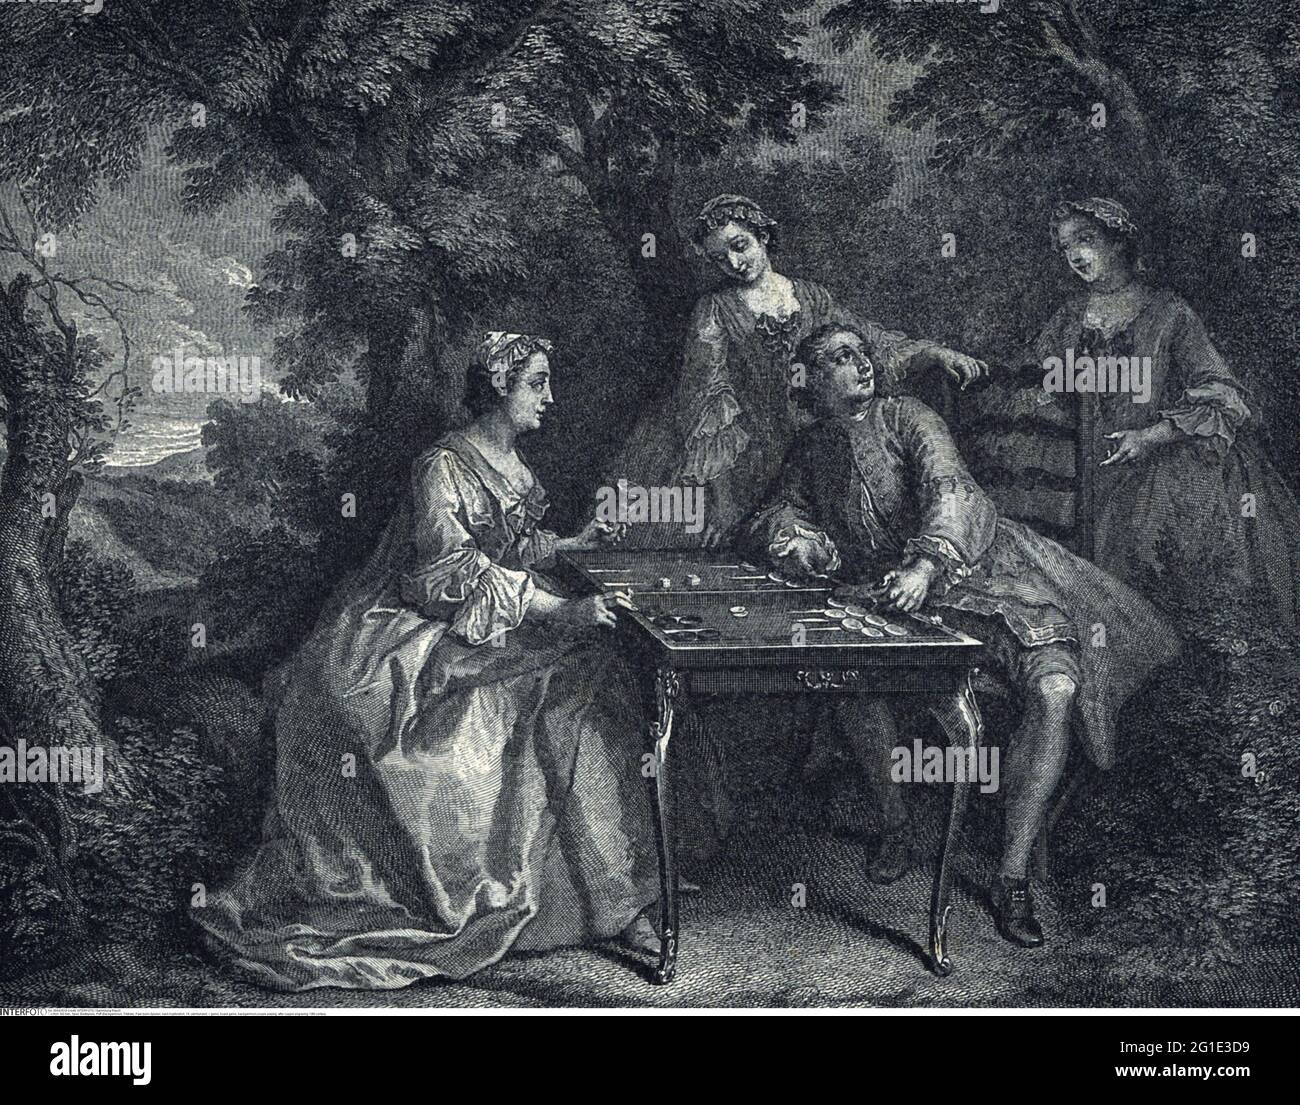 game, board game, backgammon,couple playing, after copper engraving, 18th century, ADDITIONAL-RIGHTS-CLEARANCE-INFO-NOT-AVAILABLE Stock Photo